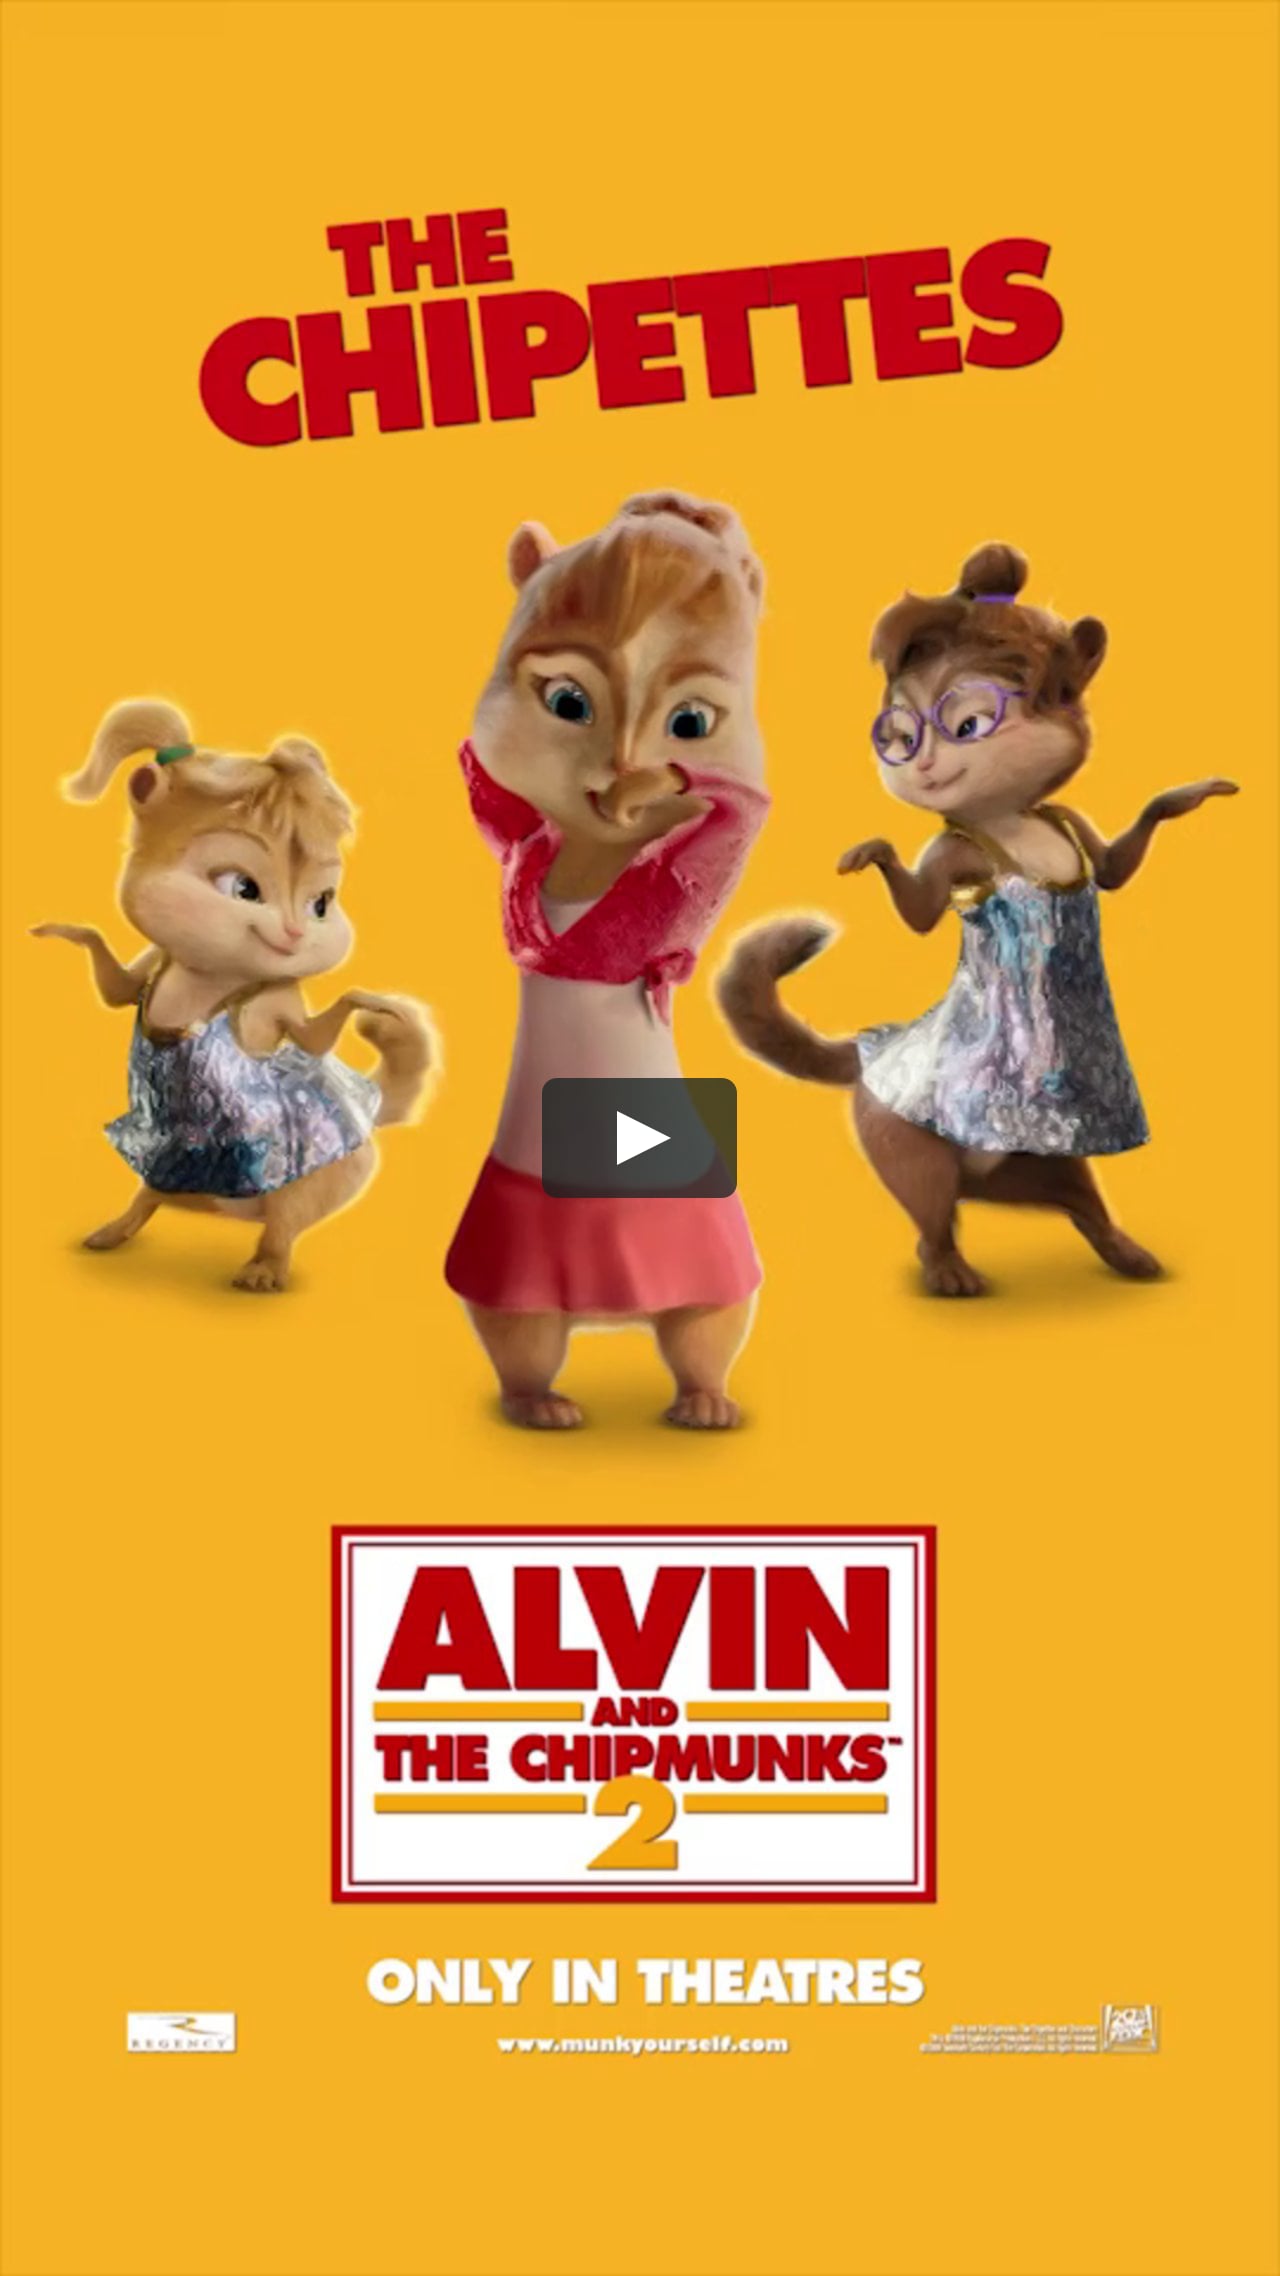 Alvin and the chipmunks the squeakquel